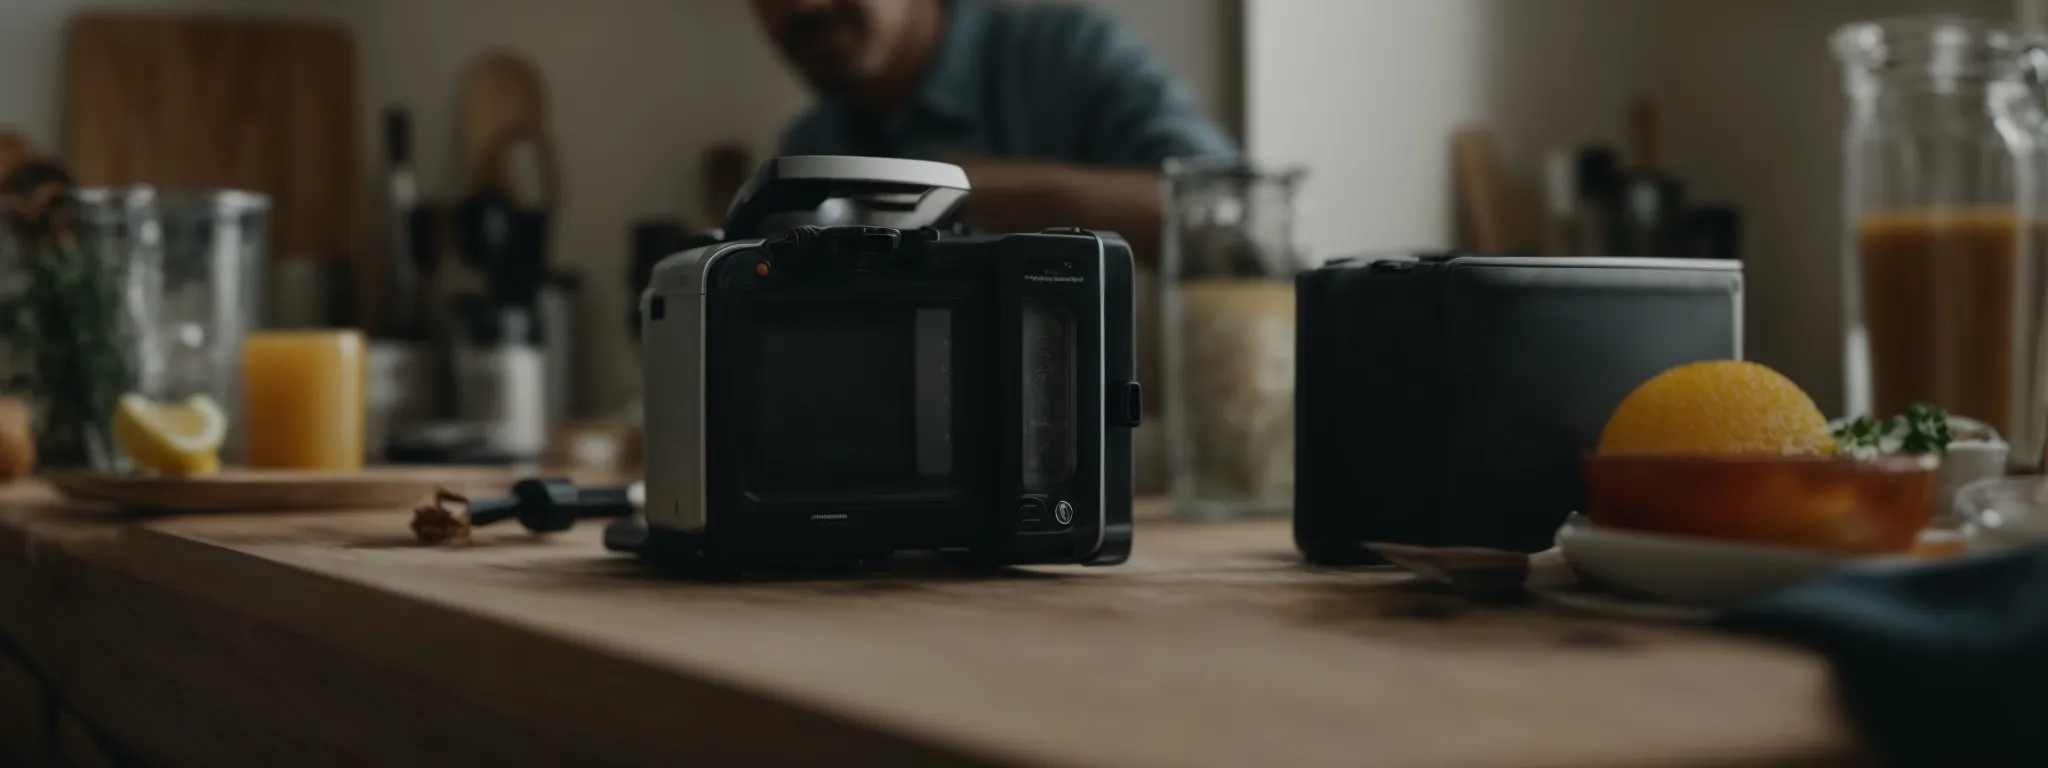 a person films a creative unboxing video showcasing the innovative uses of a simple kitchen gadget.